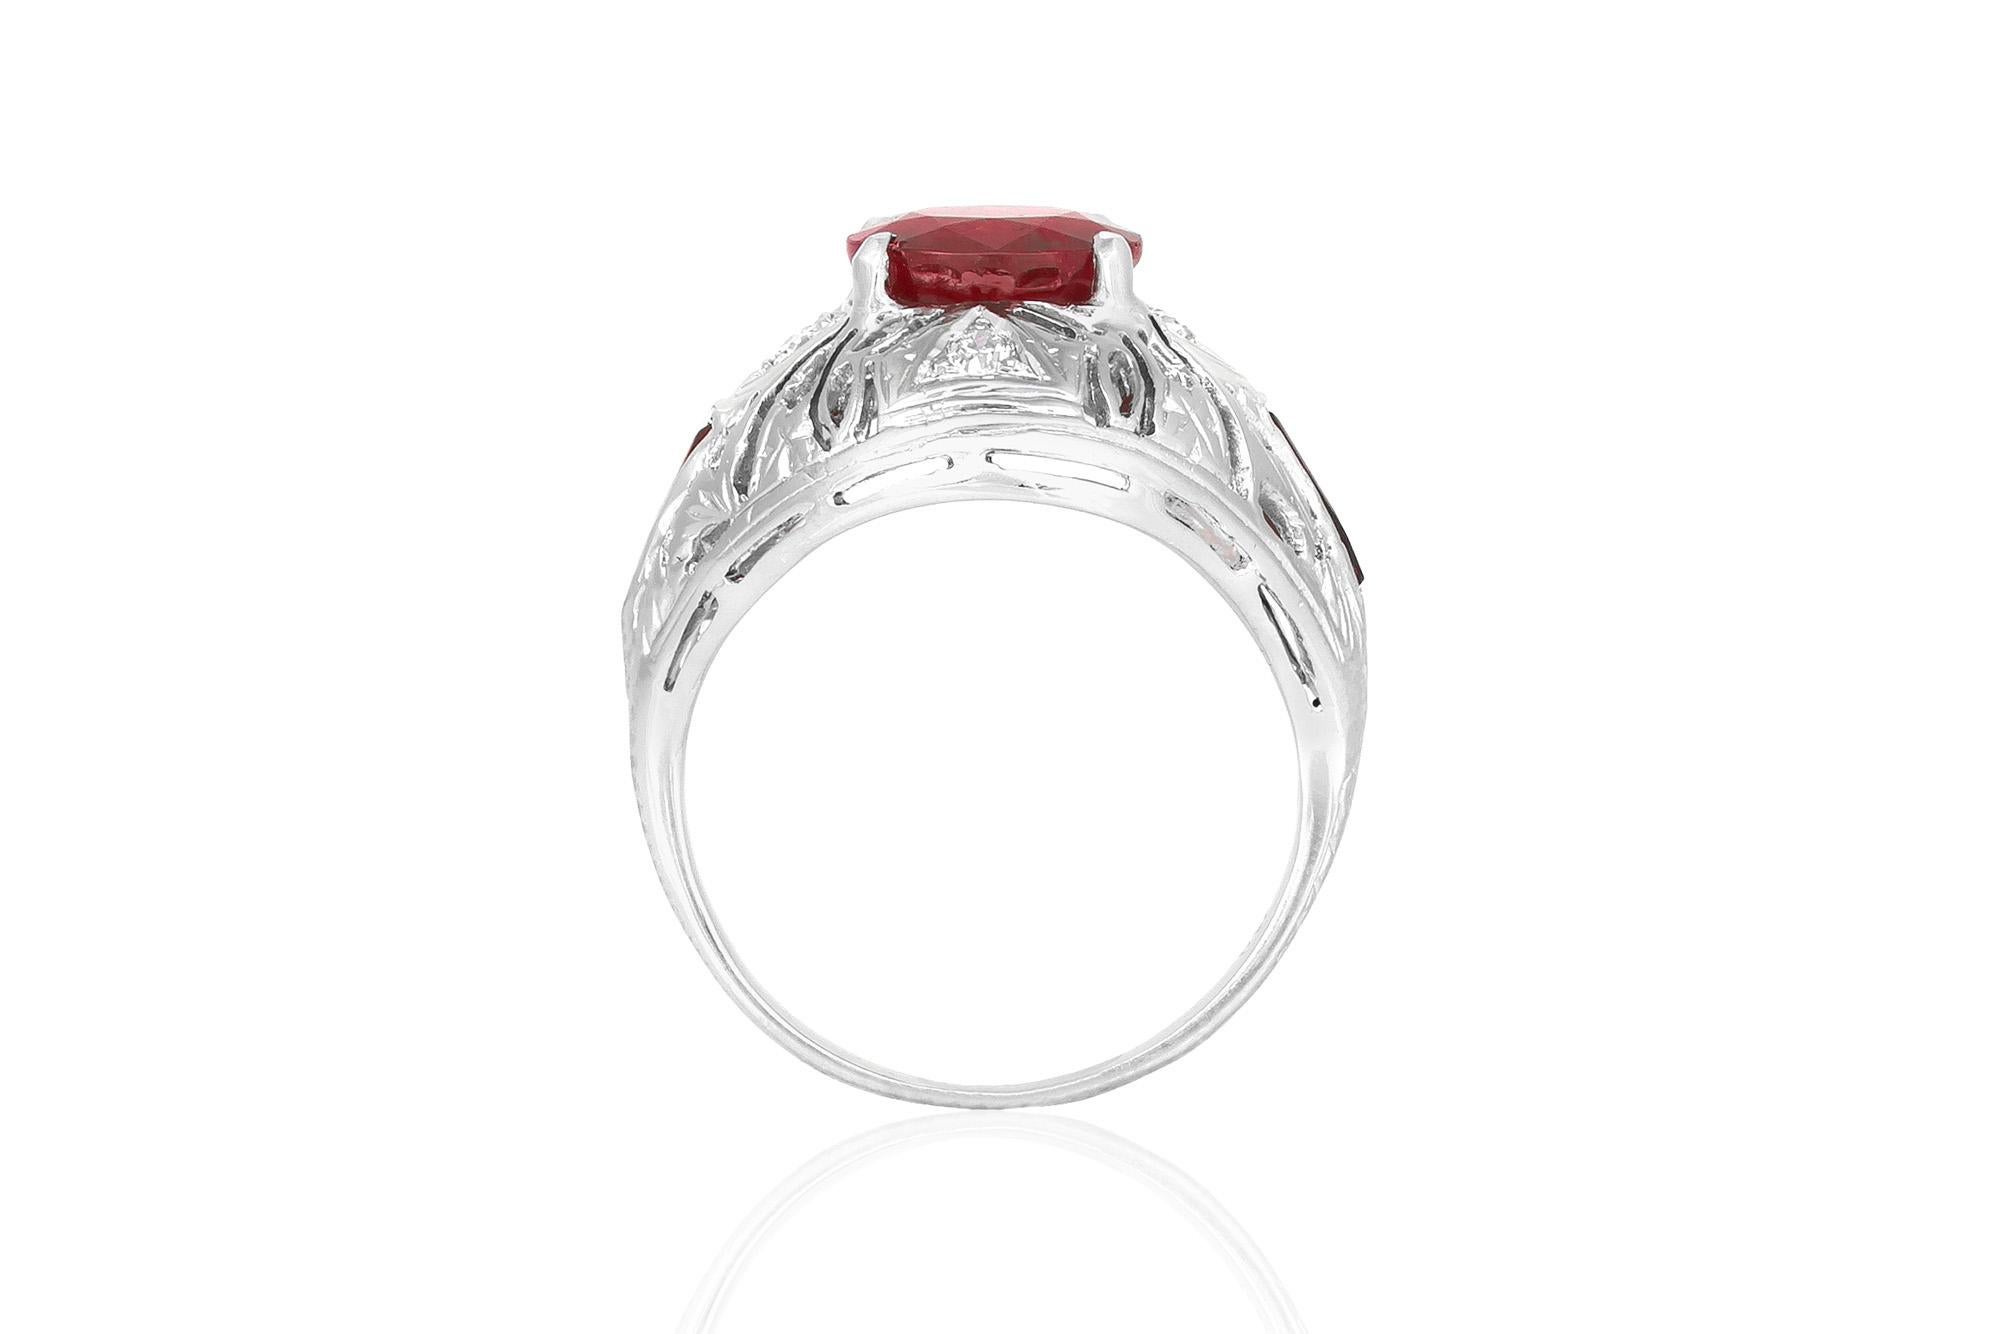 Estate ring, finely crafted in 18K white gold with filigree design. This ring features a cushion cut ruby at the center, weighing 1.84 carat. Accented with old mine cut diamonds on each side, weighing a total of 0.09 carats. Circa 1950's.



